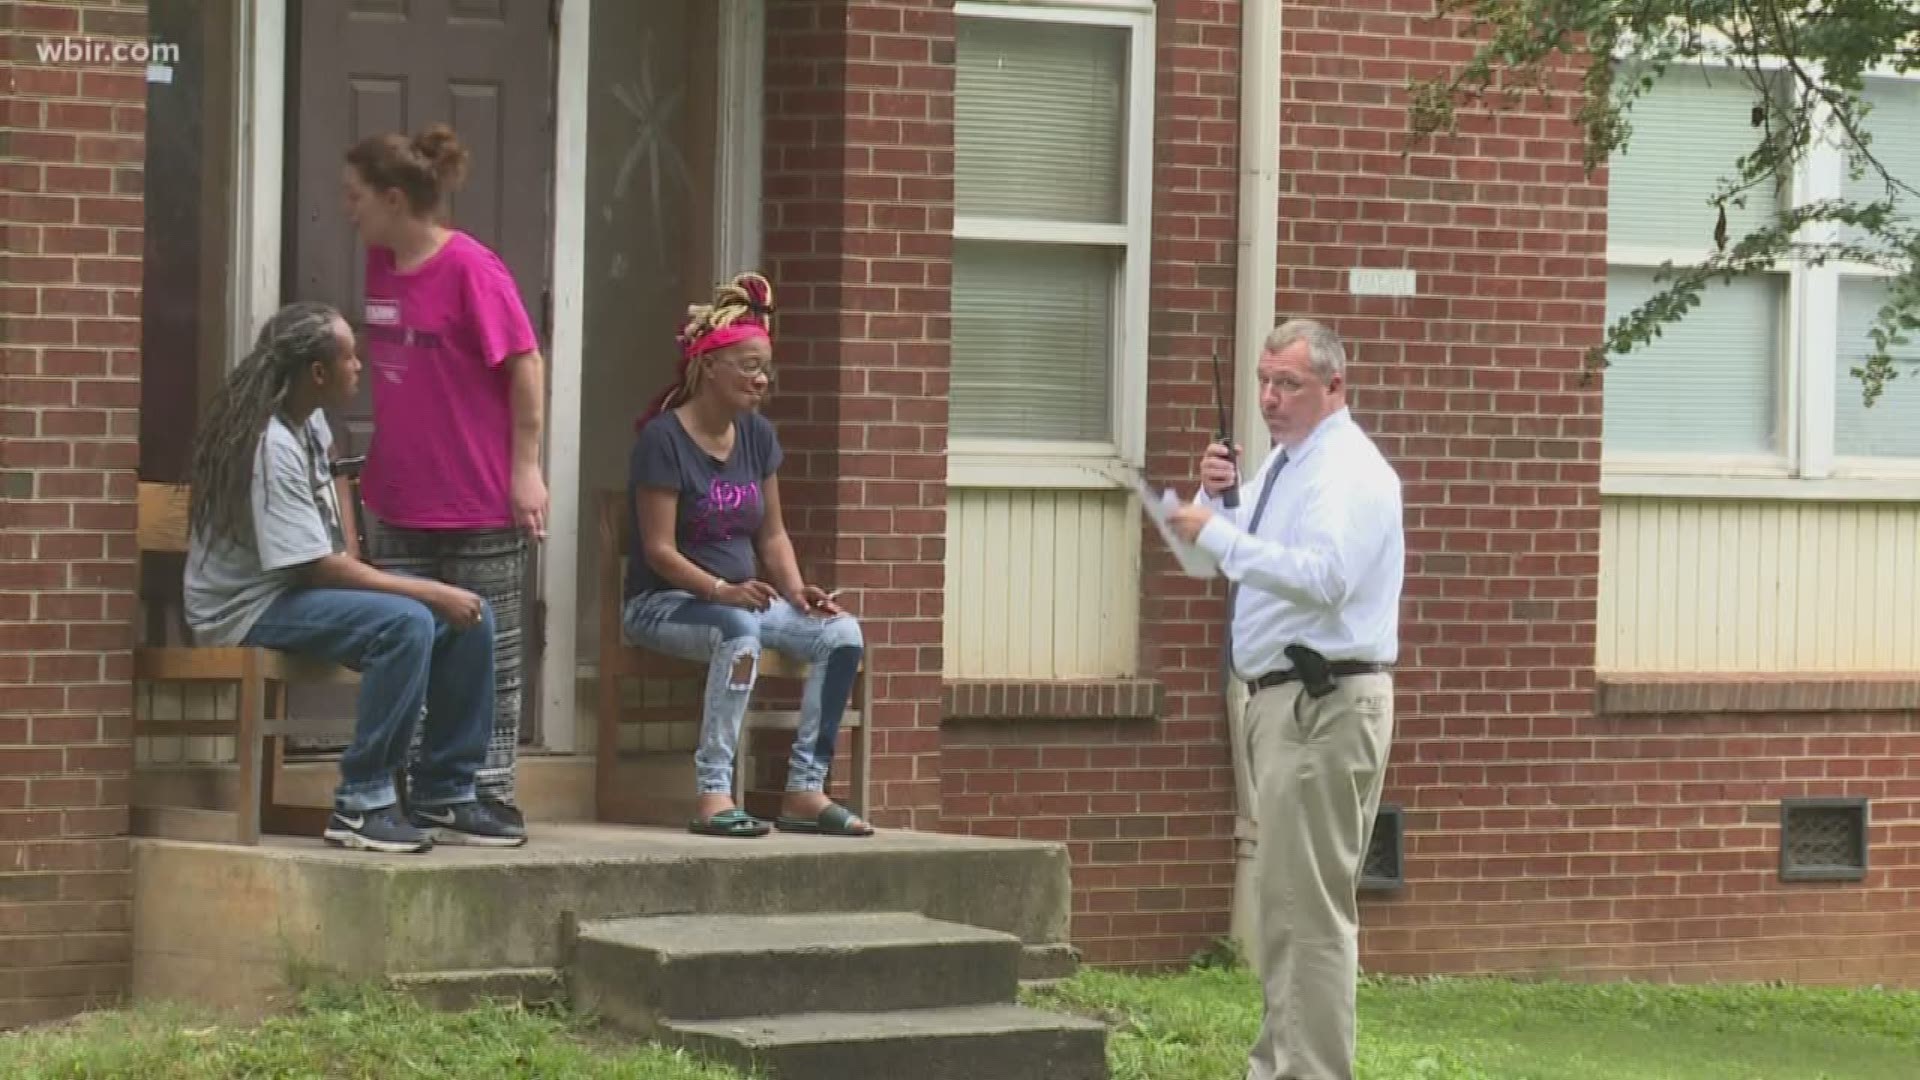 Investigators re-canvassed an East Knoxville neighborhood this afternoon, seeking new information about an unsolved homicide.